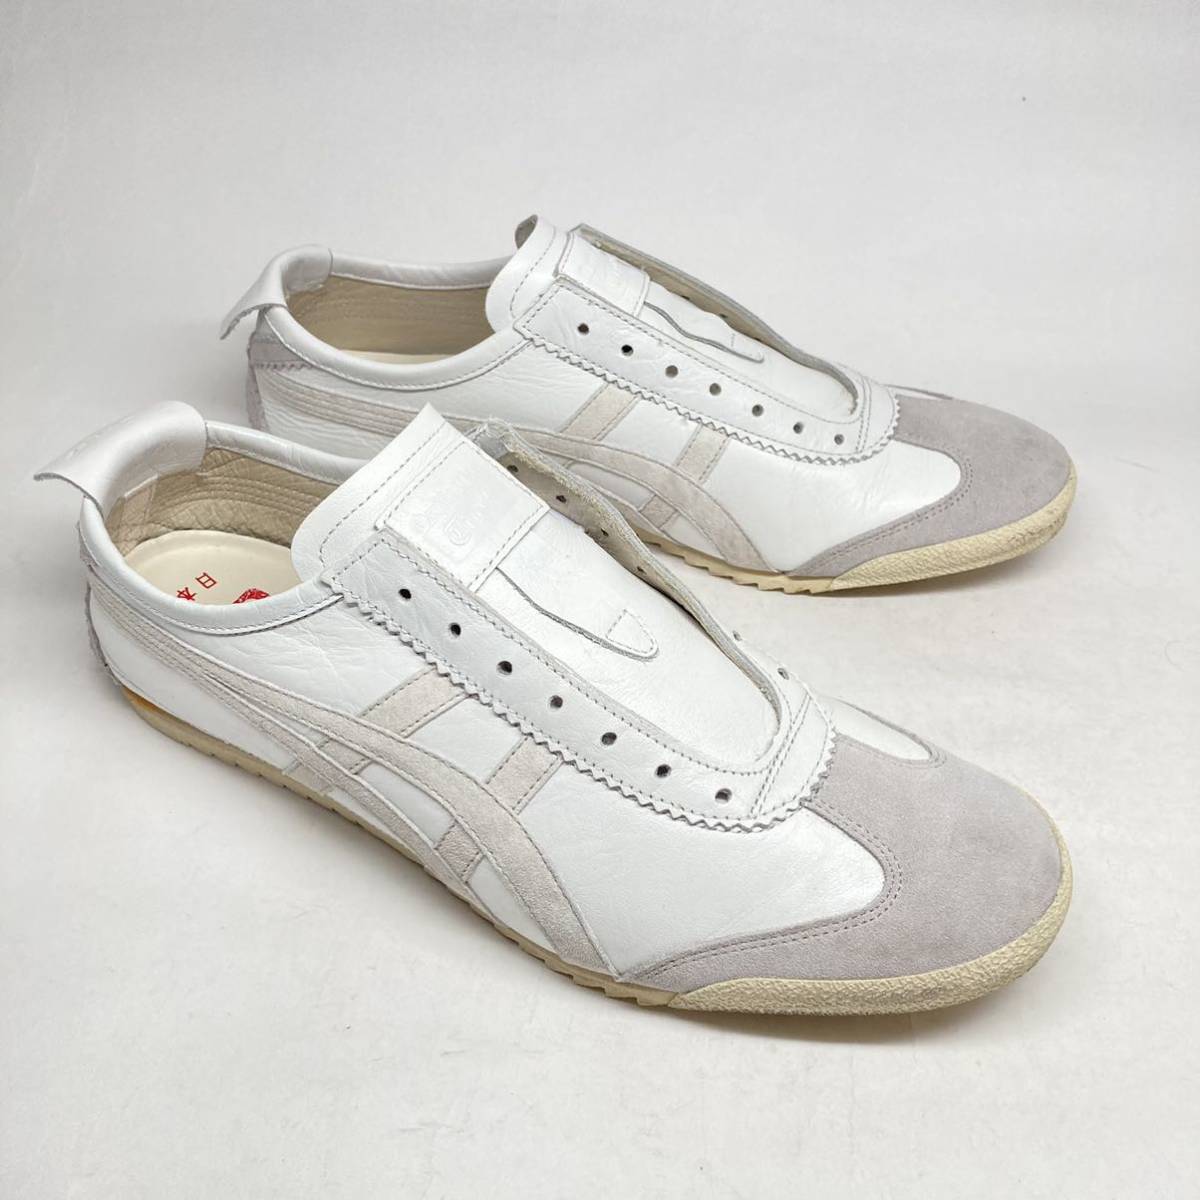  prompt decision! standard! made in Japan Onitsuka Tiger MEXICO 66 SLIP-ON DELUXE leather white 26cm D7Q0L /onitsuka Tiger Mexico slip-on shoes white 